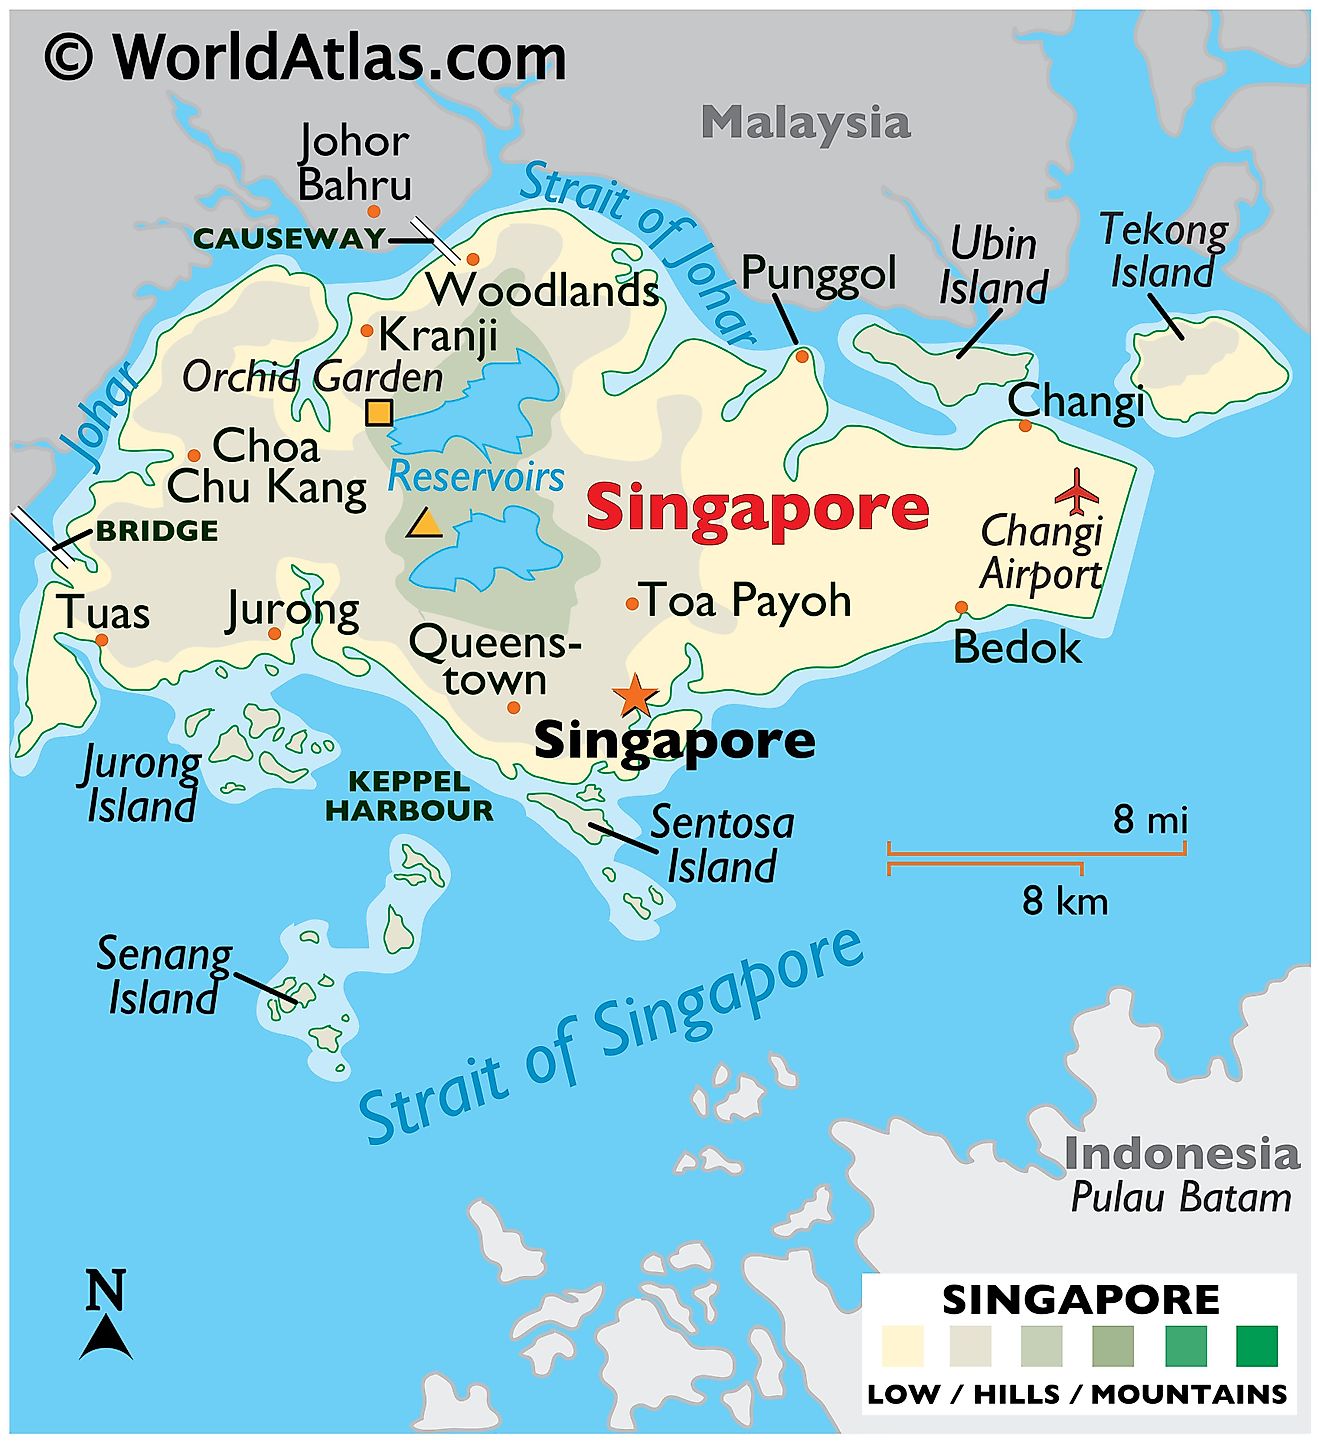 Singapore Maps And Facts World Atlas